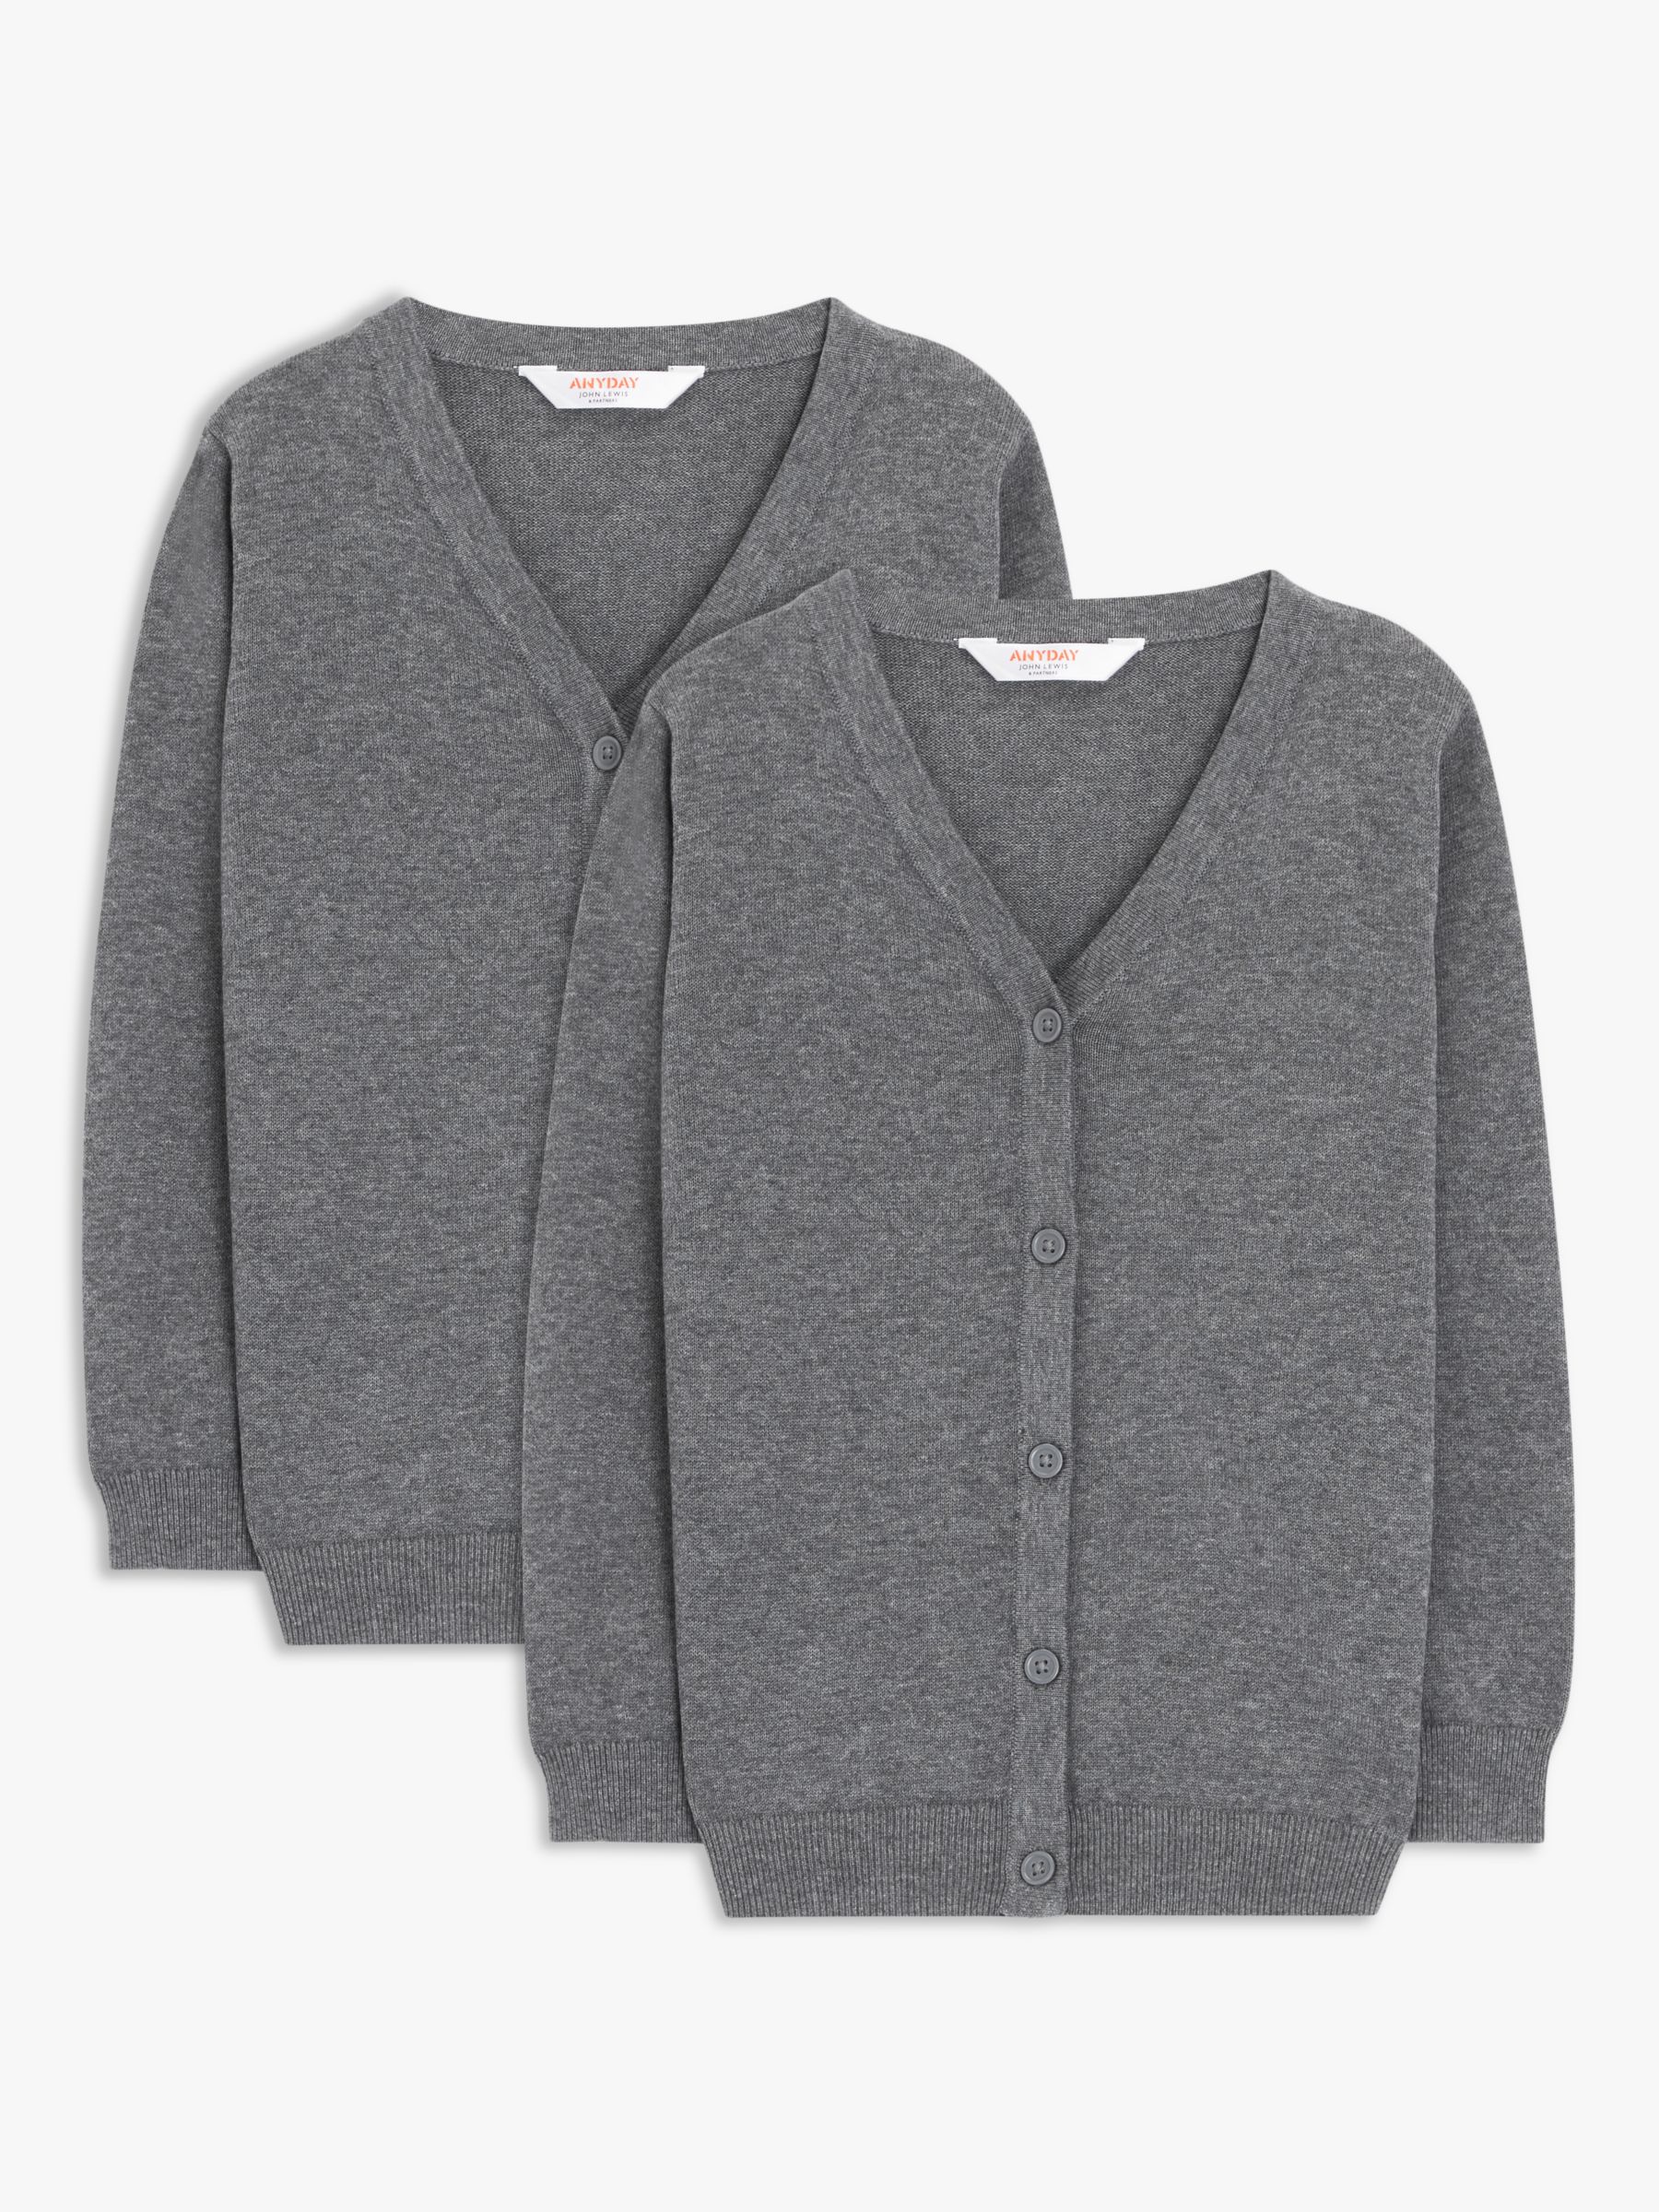 John Lewis ANYDAY Unisex Cotton School Cardigan, Pack of 2, Grey Charcoal, 38